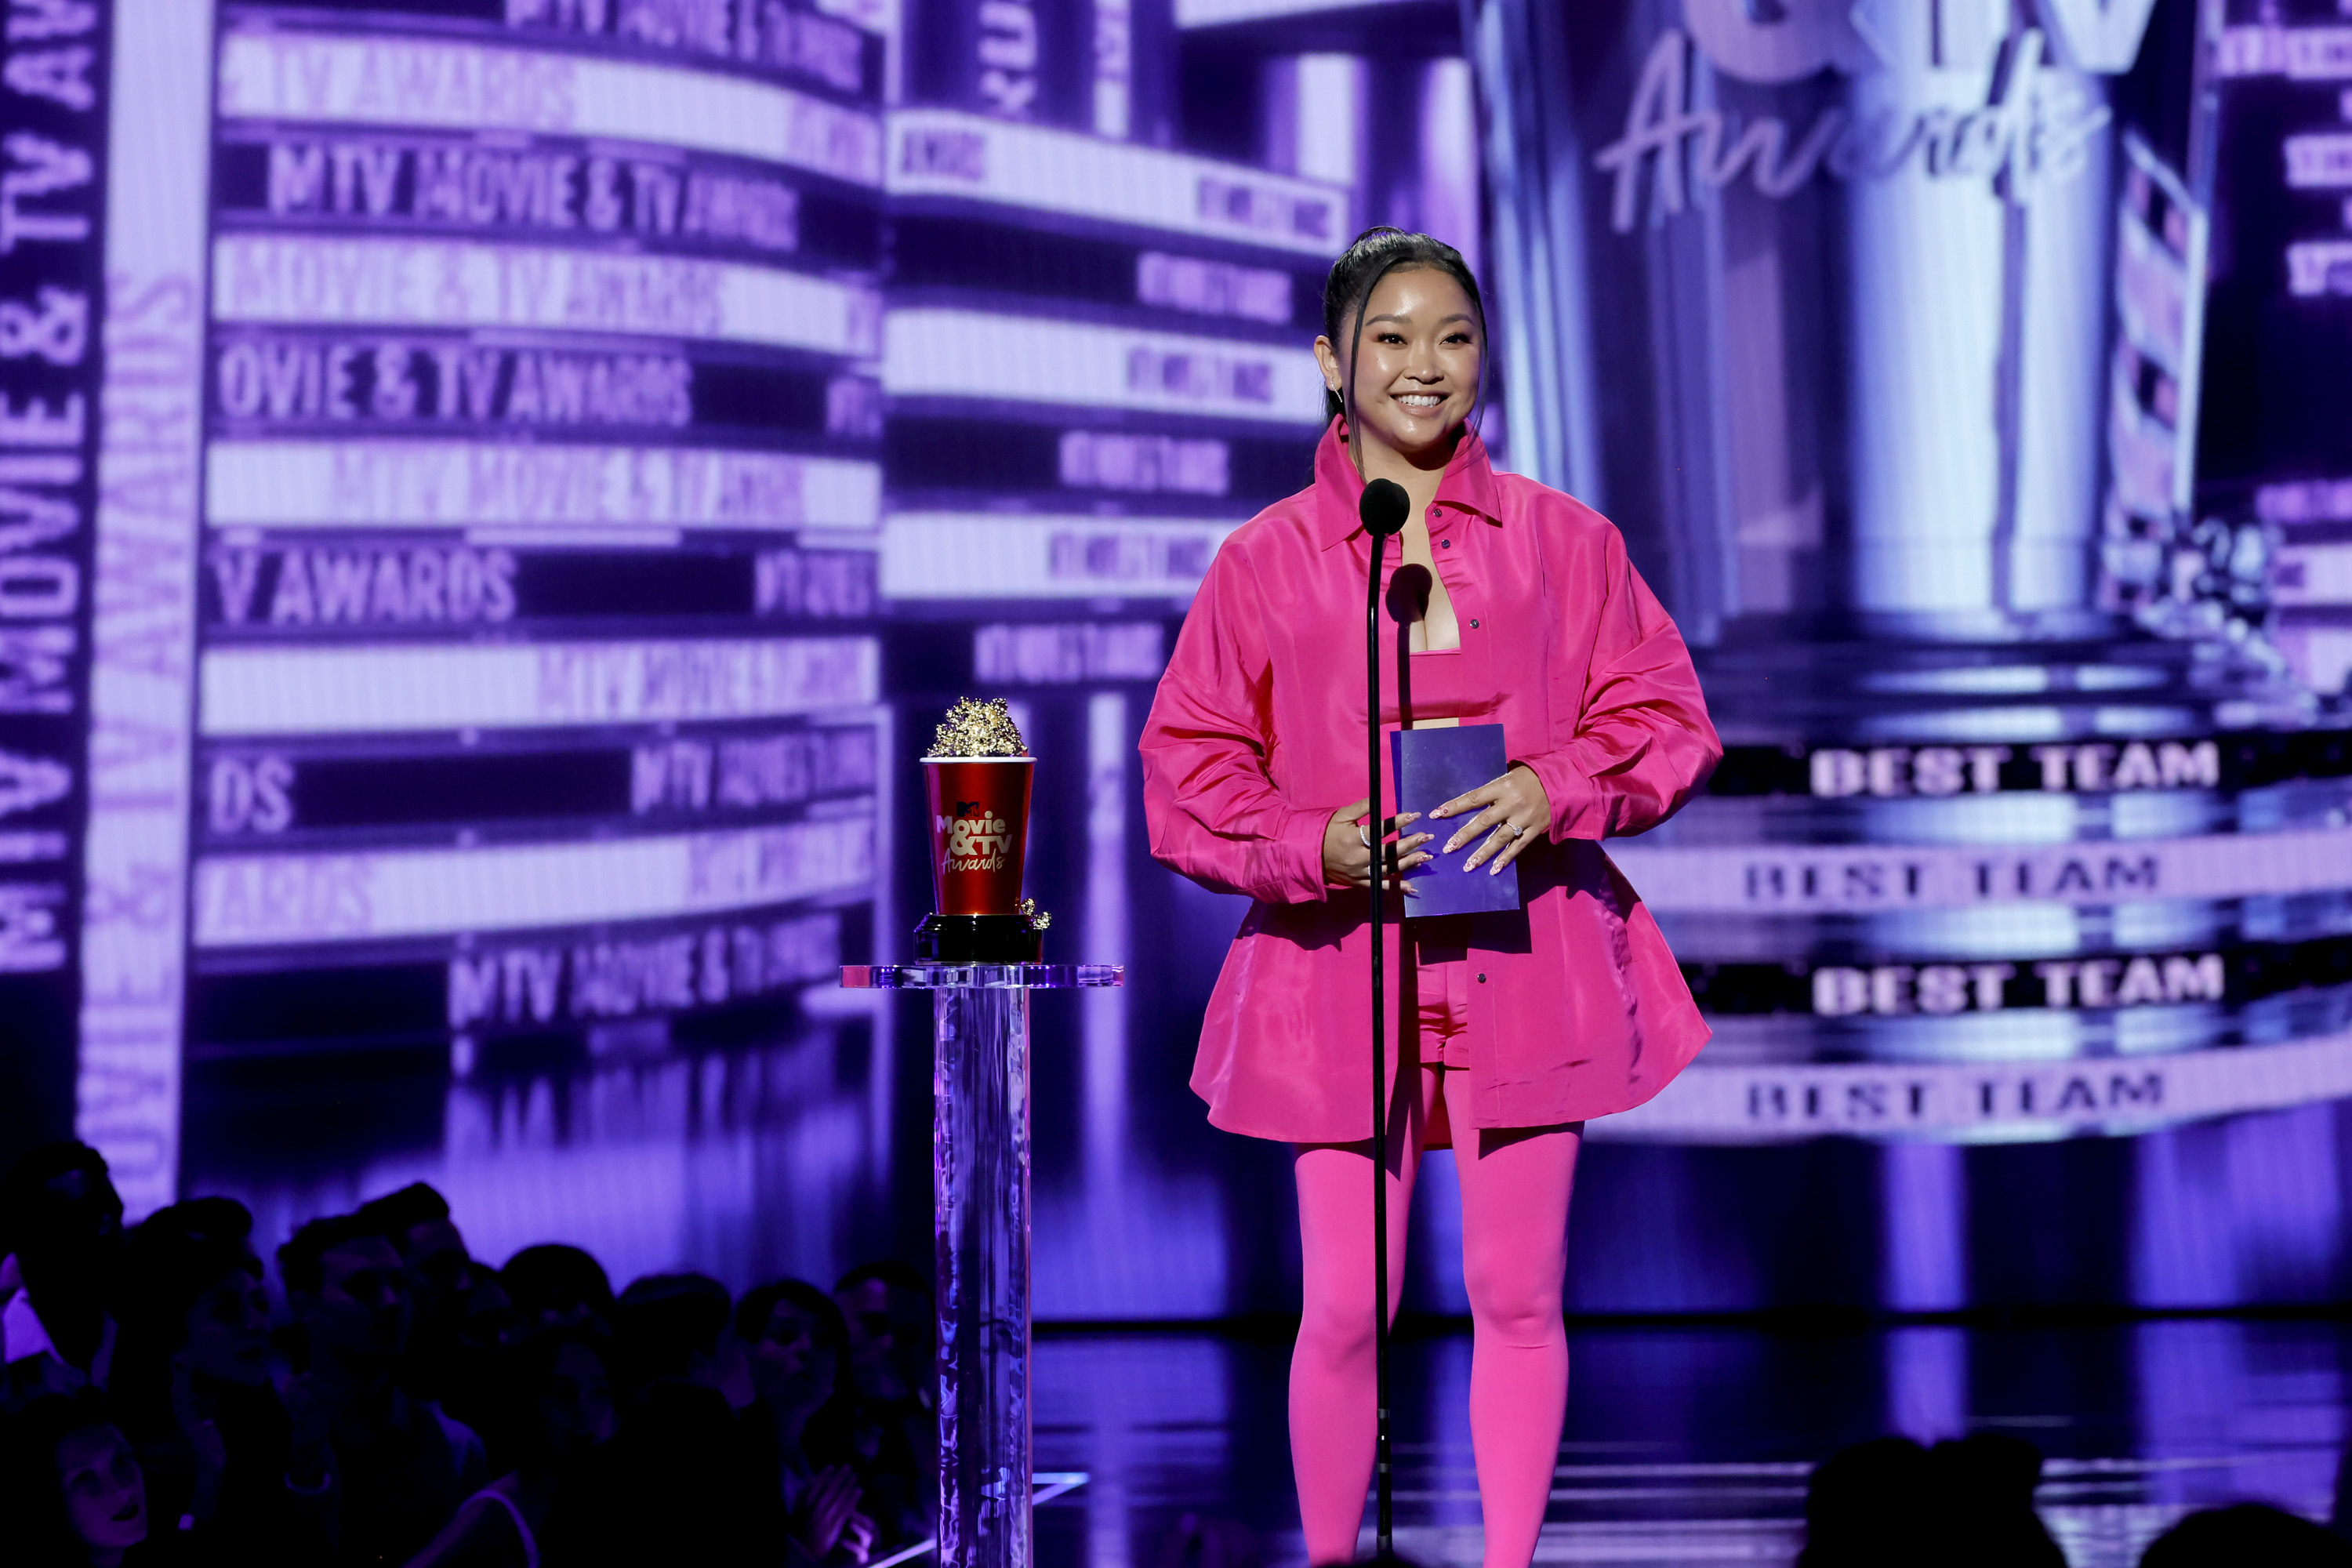 Lana Condor on stage at the MTV Movie & TV Awards in an all-pink look